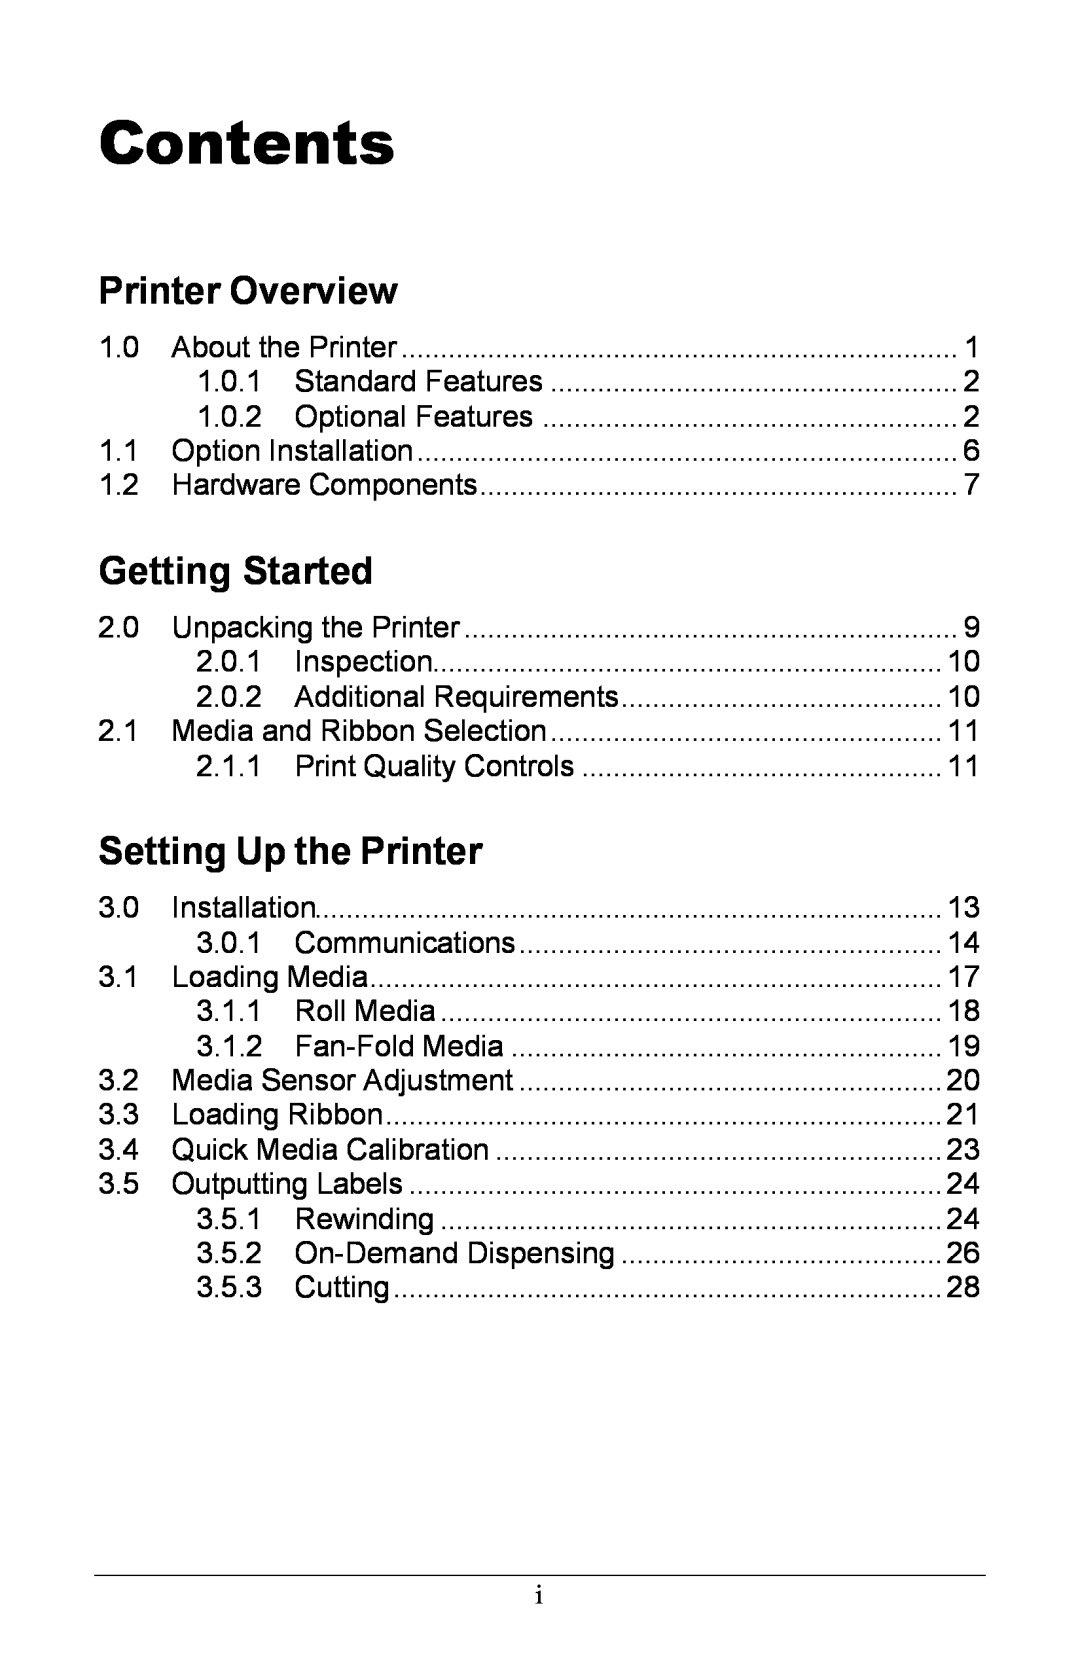 Xerox I Class manual Contents, Printer Overview, Getting Started, Setting Up the Printer 